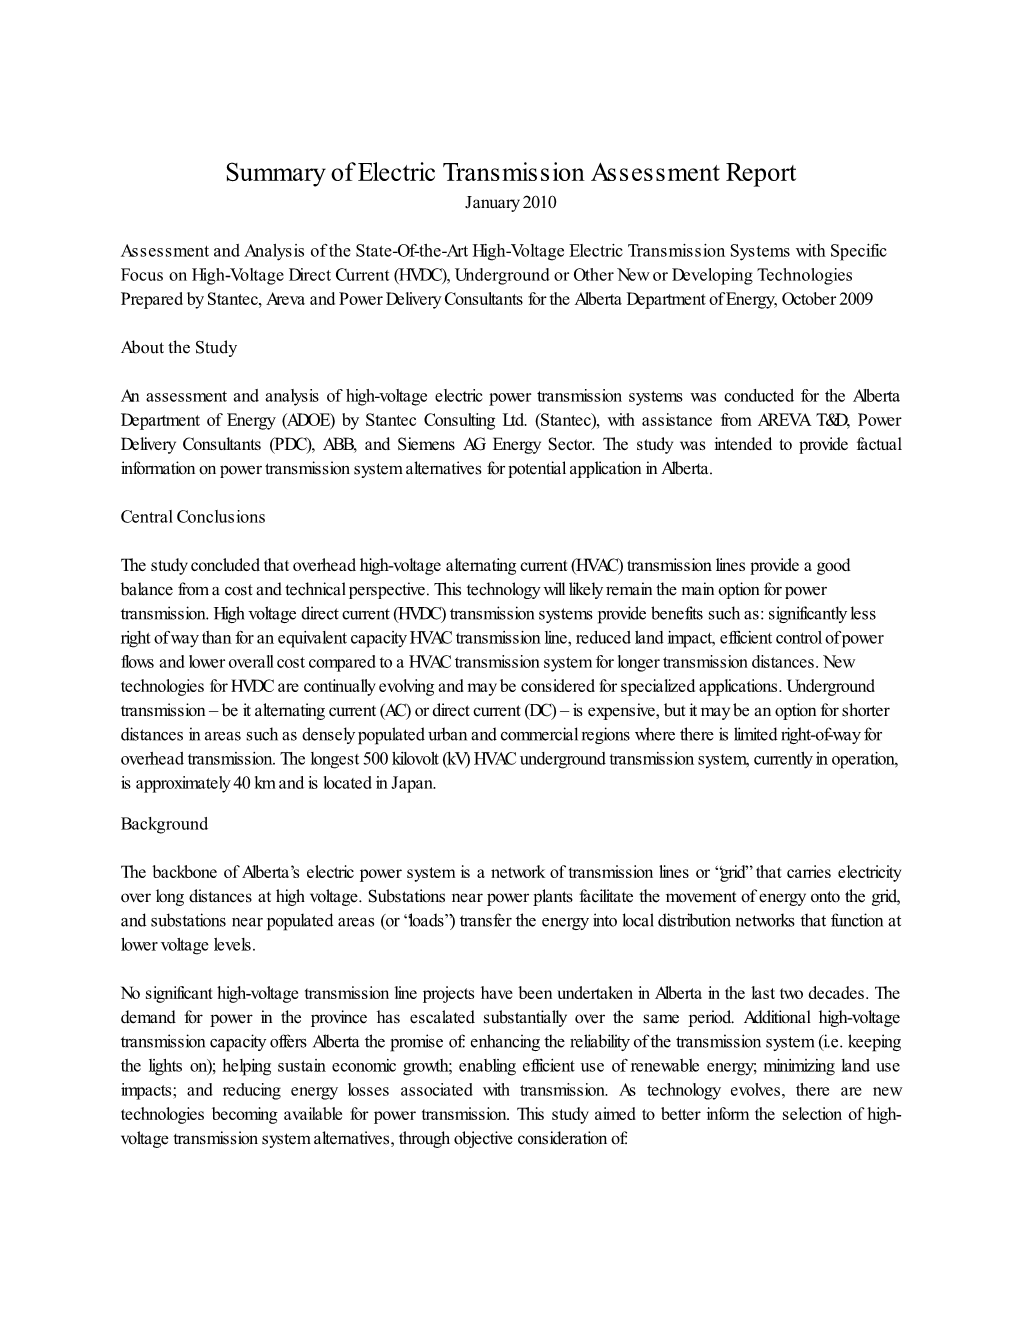 Summary of Electric Transmission Assessment Report January 2010